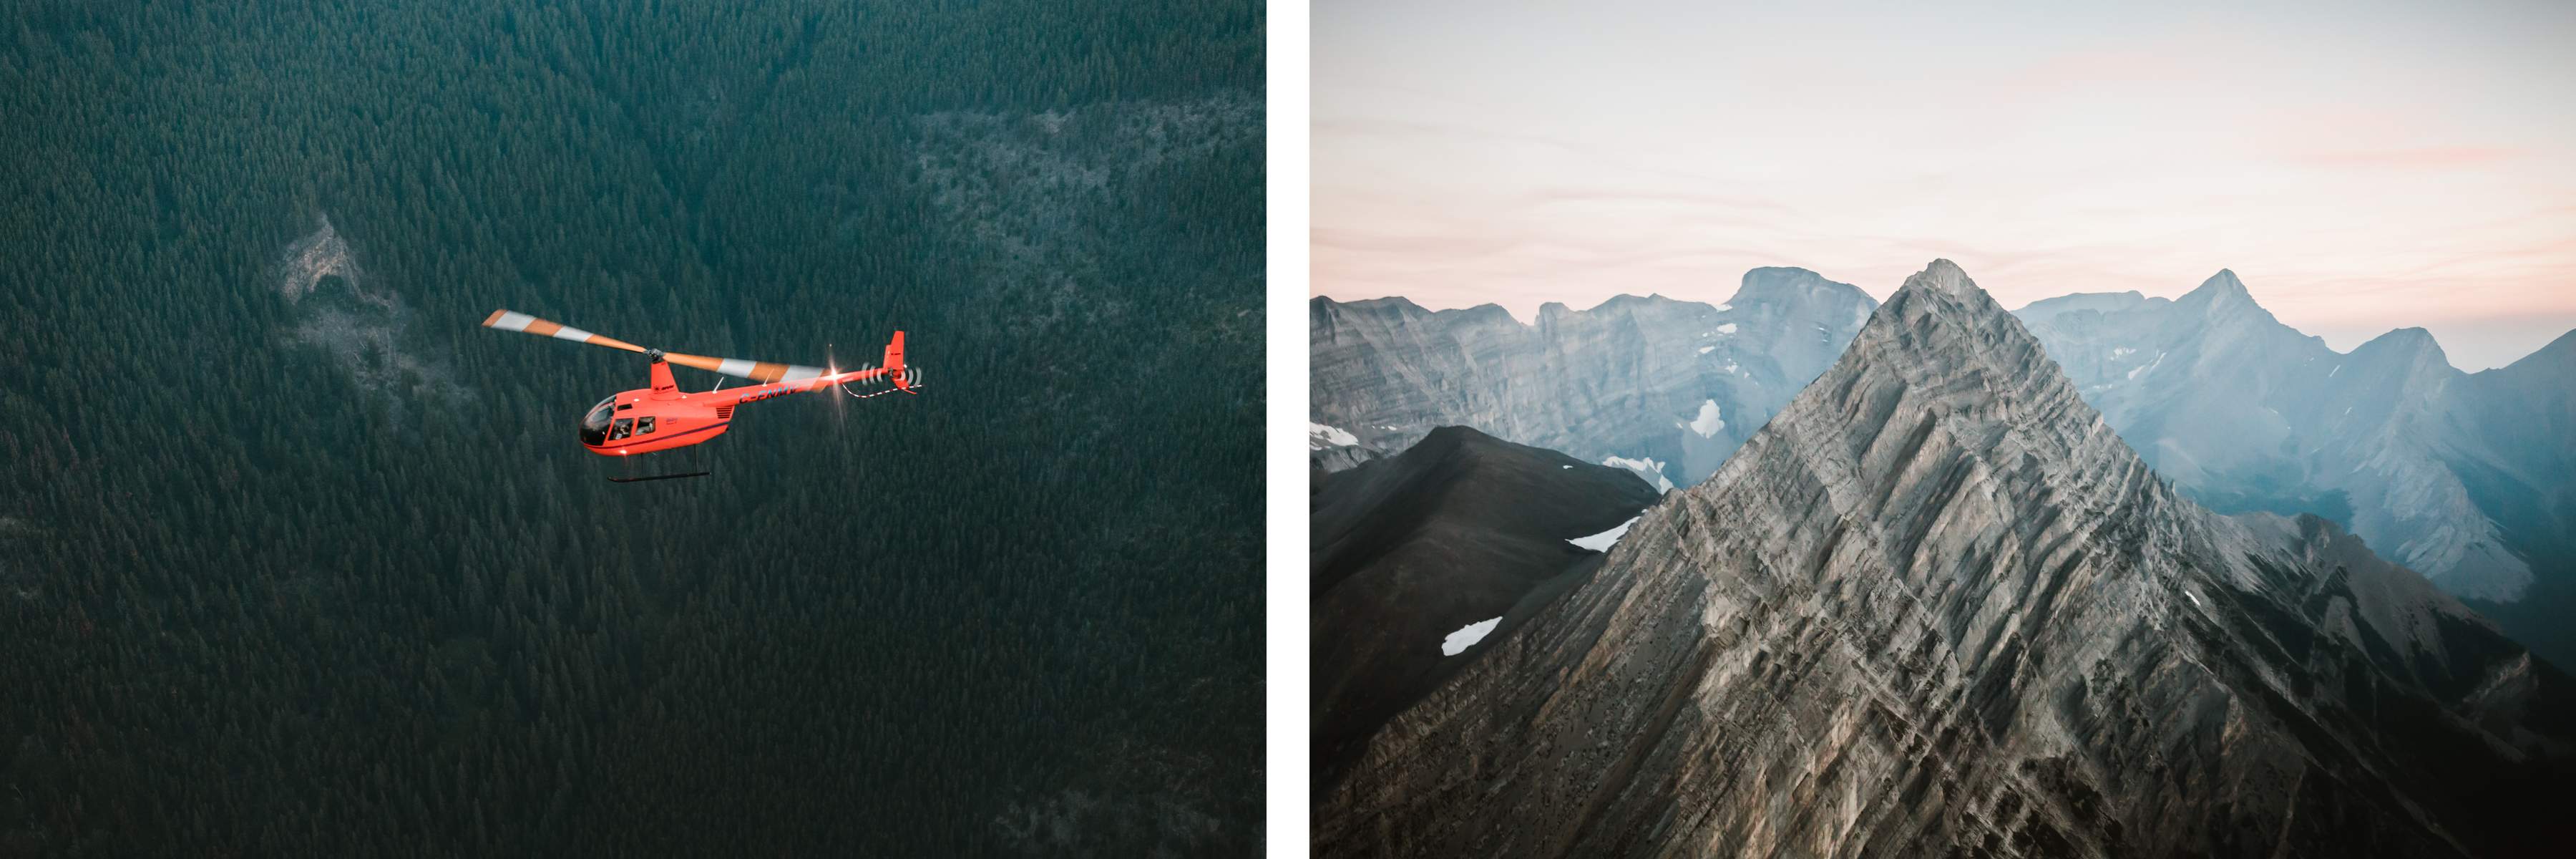 Banff Helicopter Elopement Photographers - Image 4